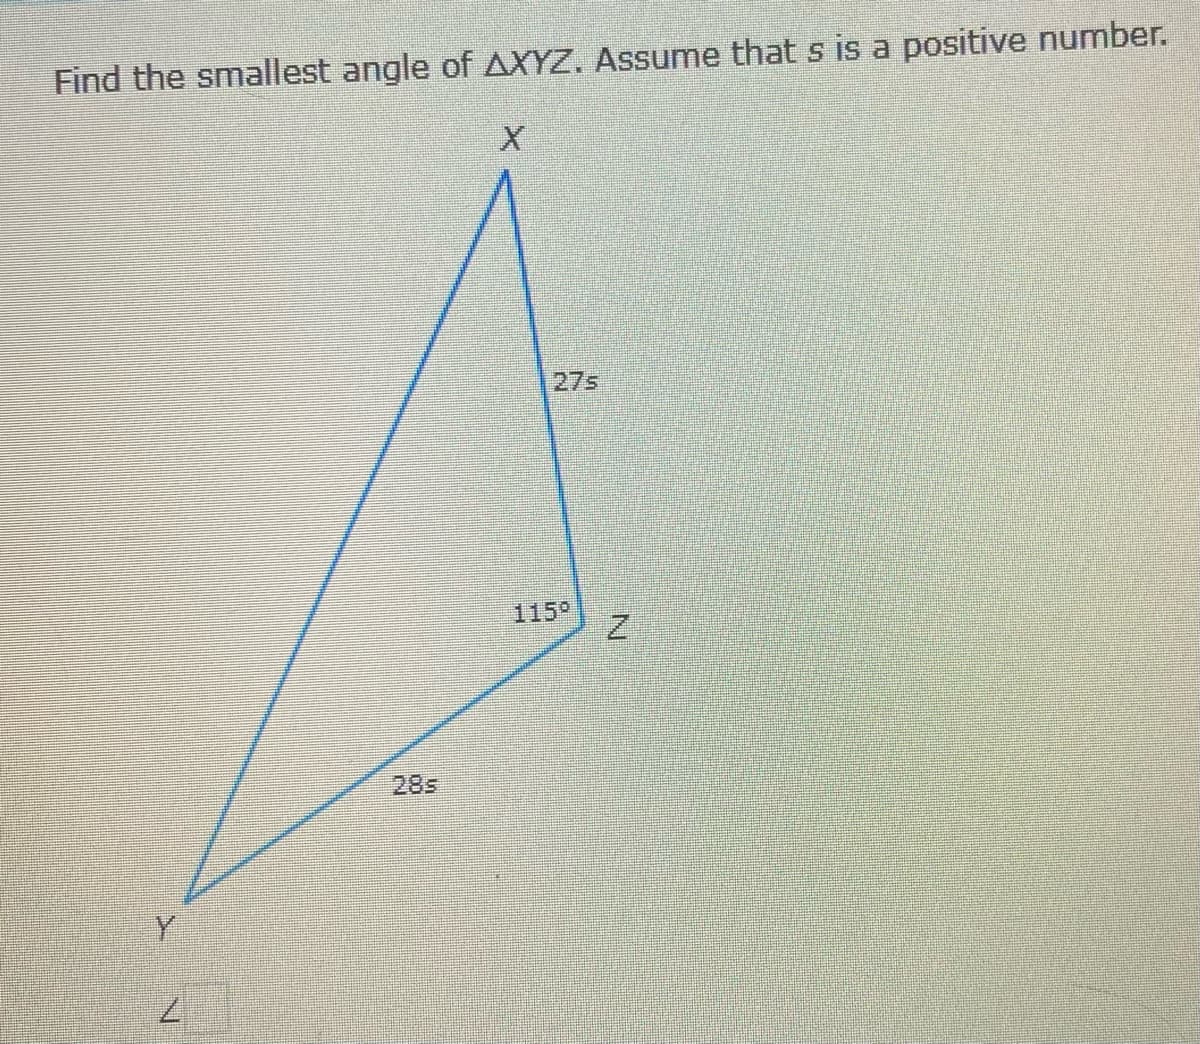 Find the smallest angle of AXYZ, Assume that s is a positive number.
27s
115°
285
Y.
